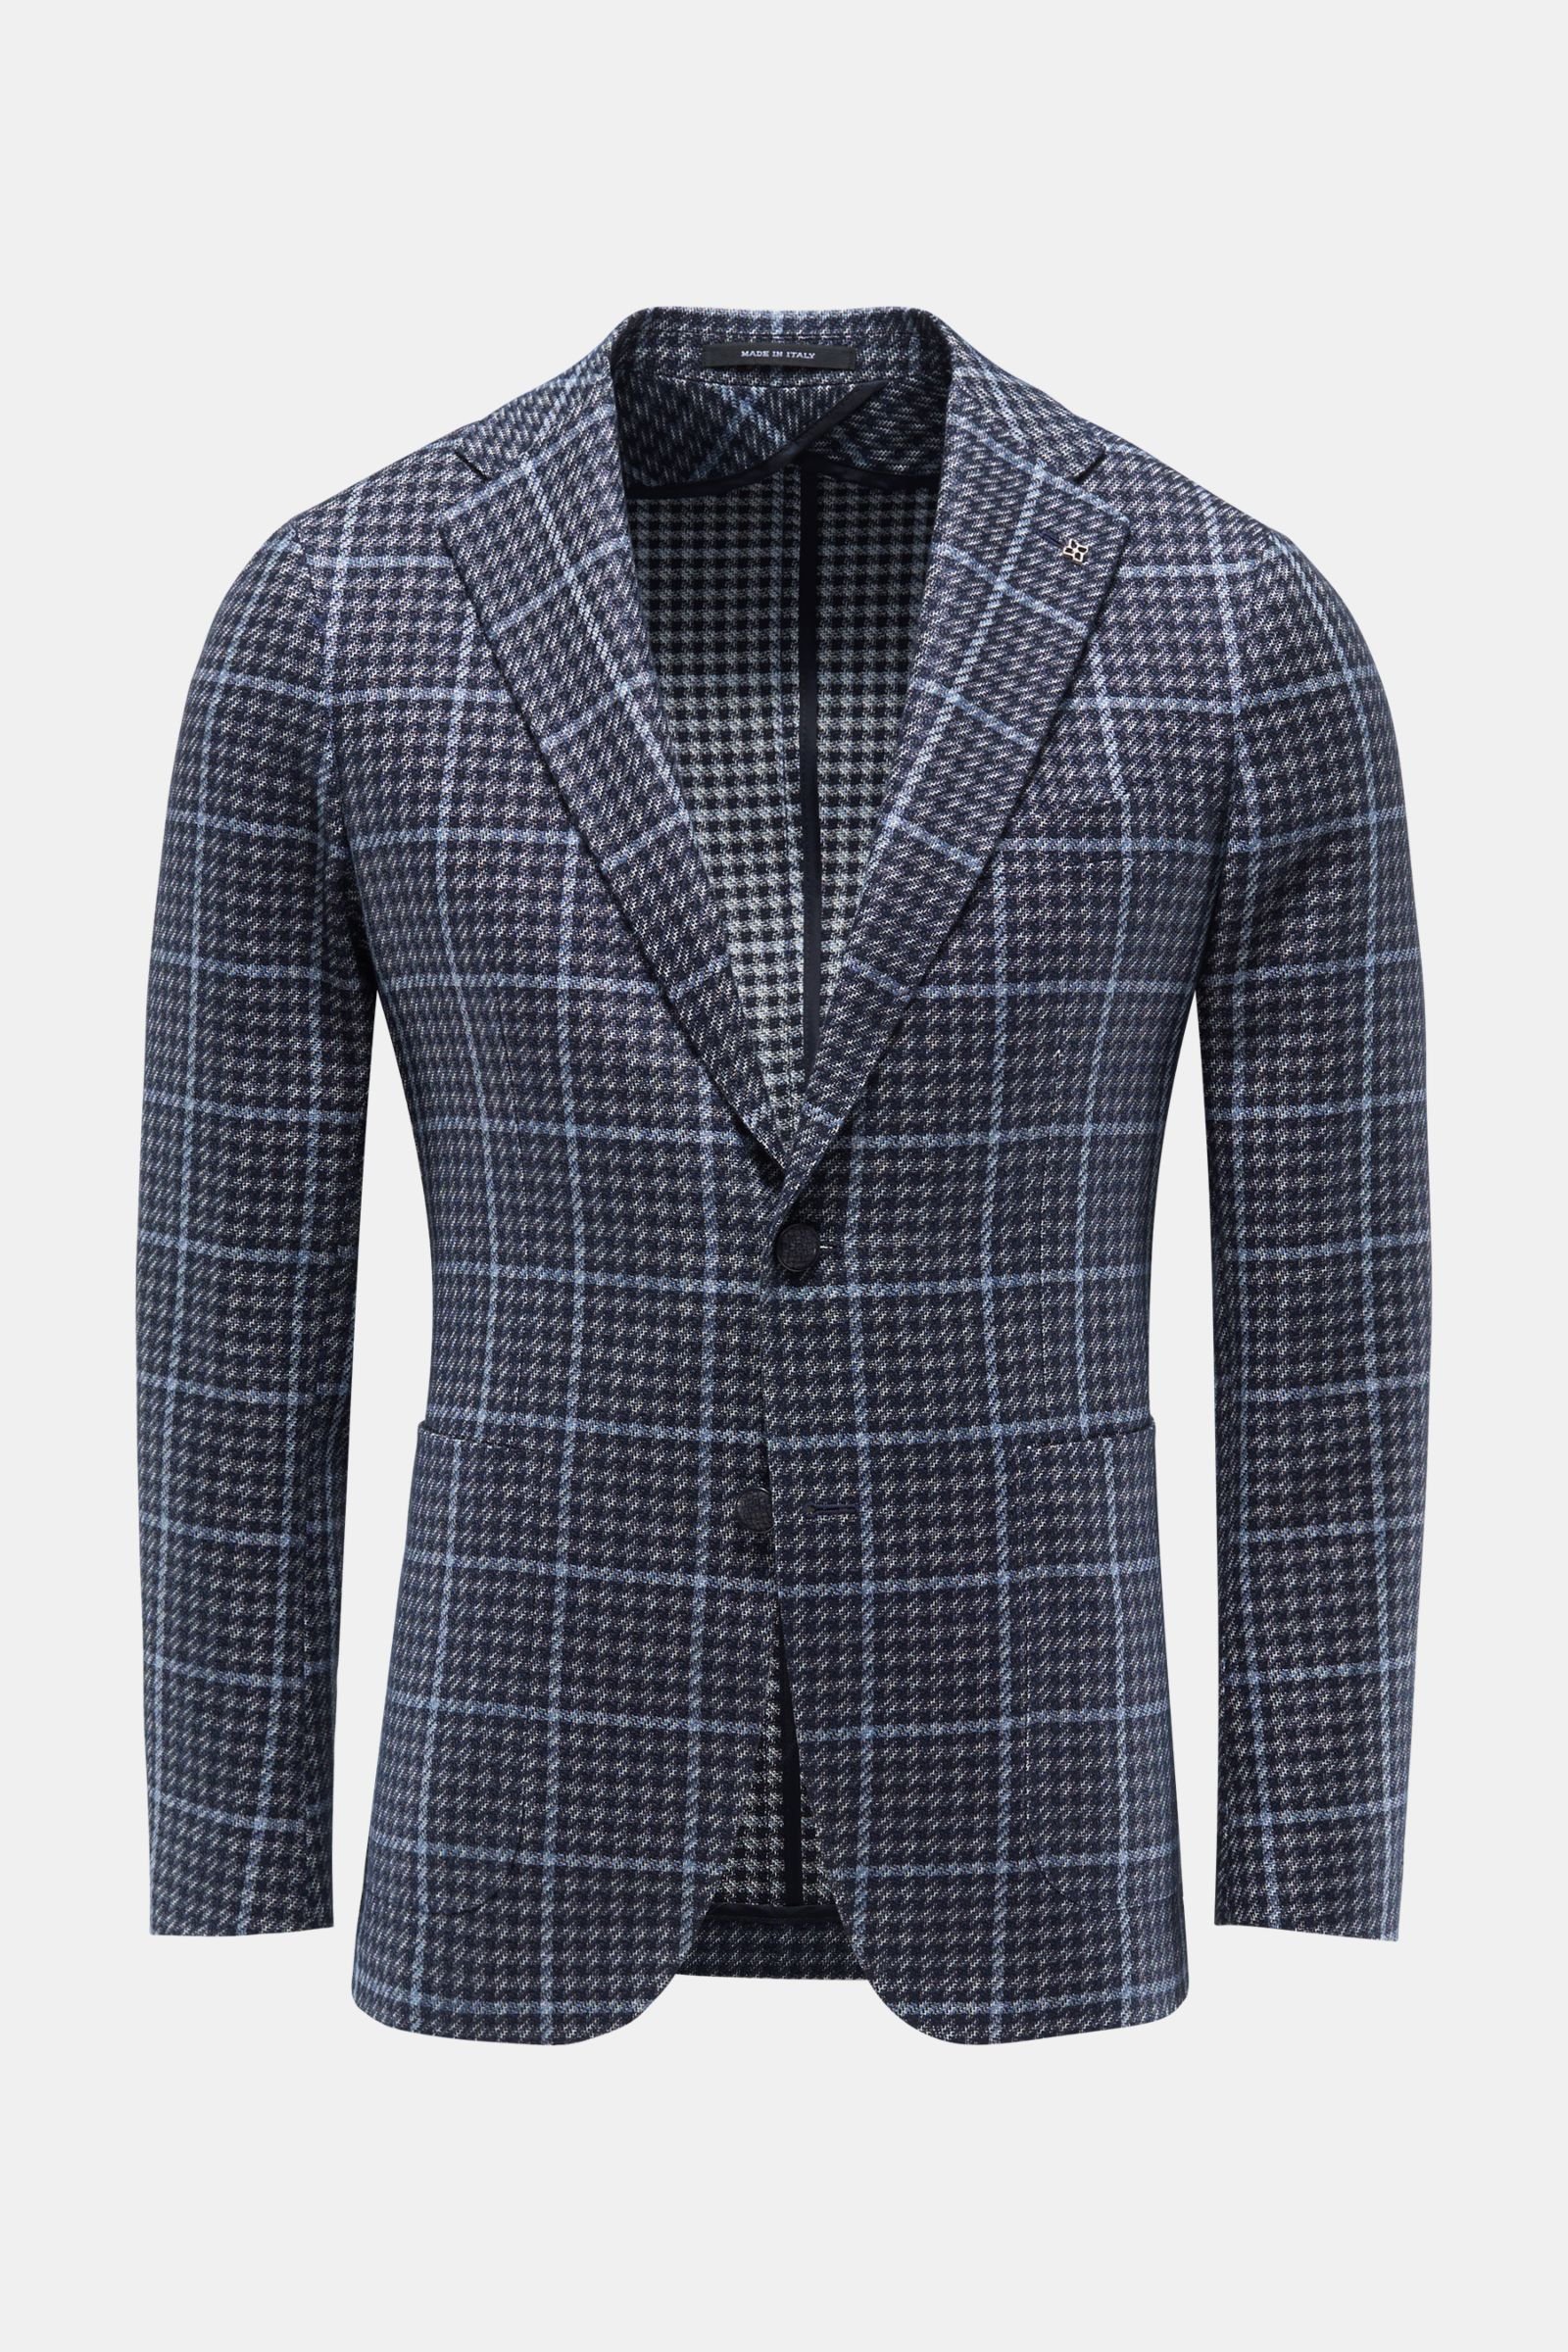 Smart-casual jacket navy/grey-blue checked